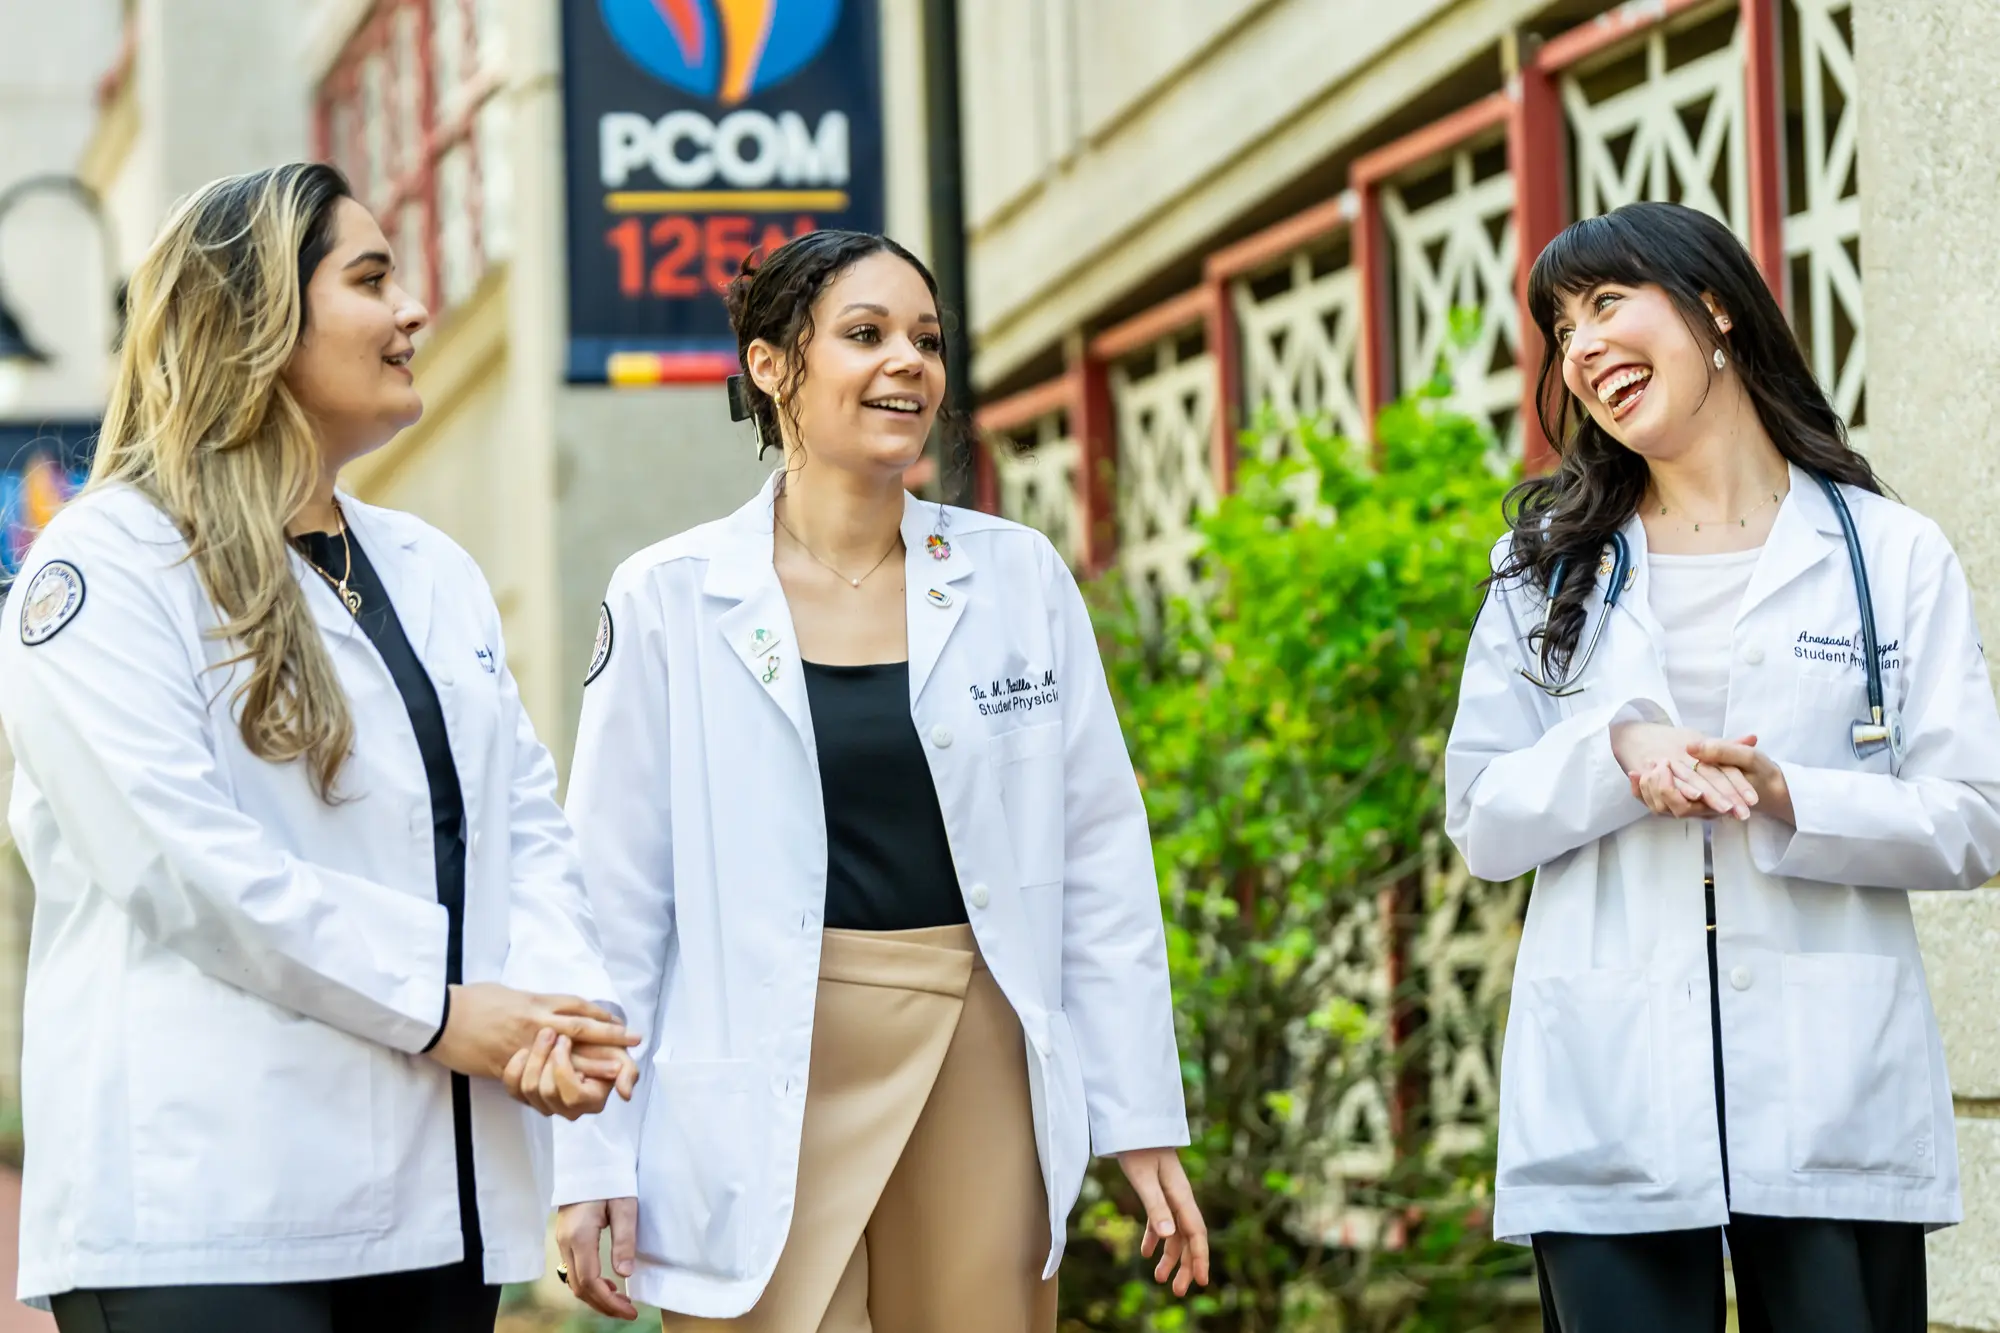 Three PCOM med students walking and smiling on a path on the Philadelphia campus